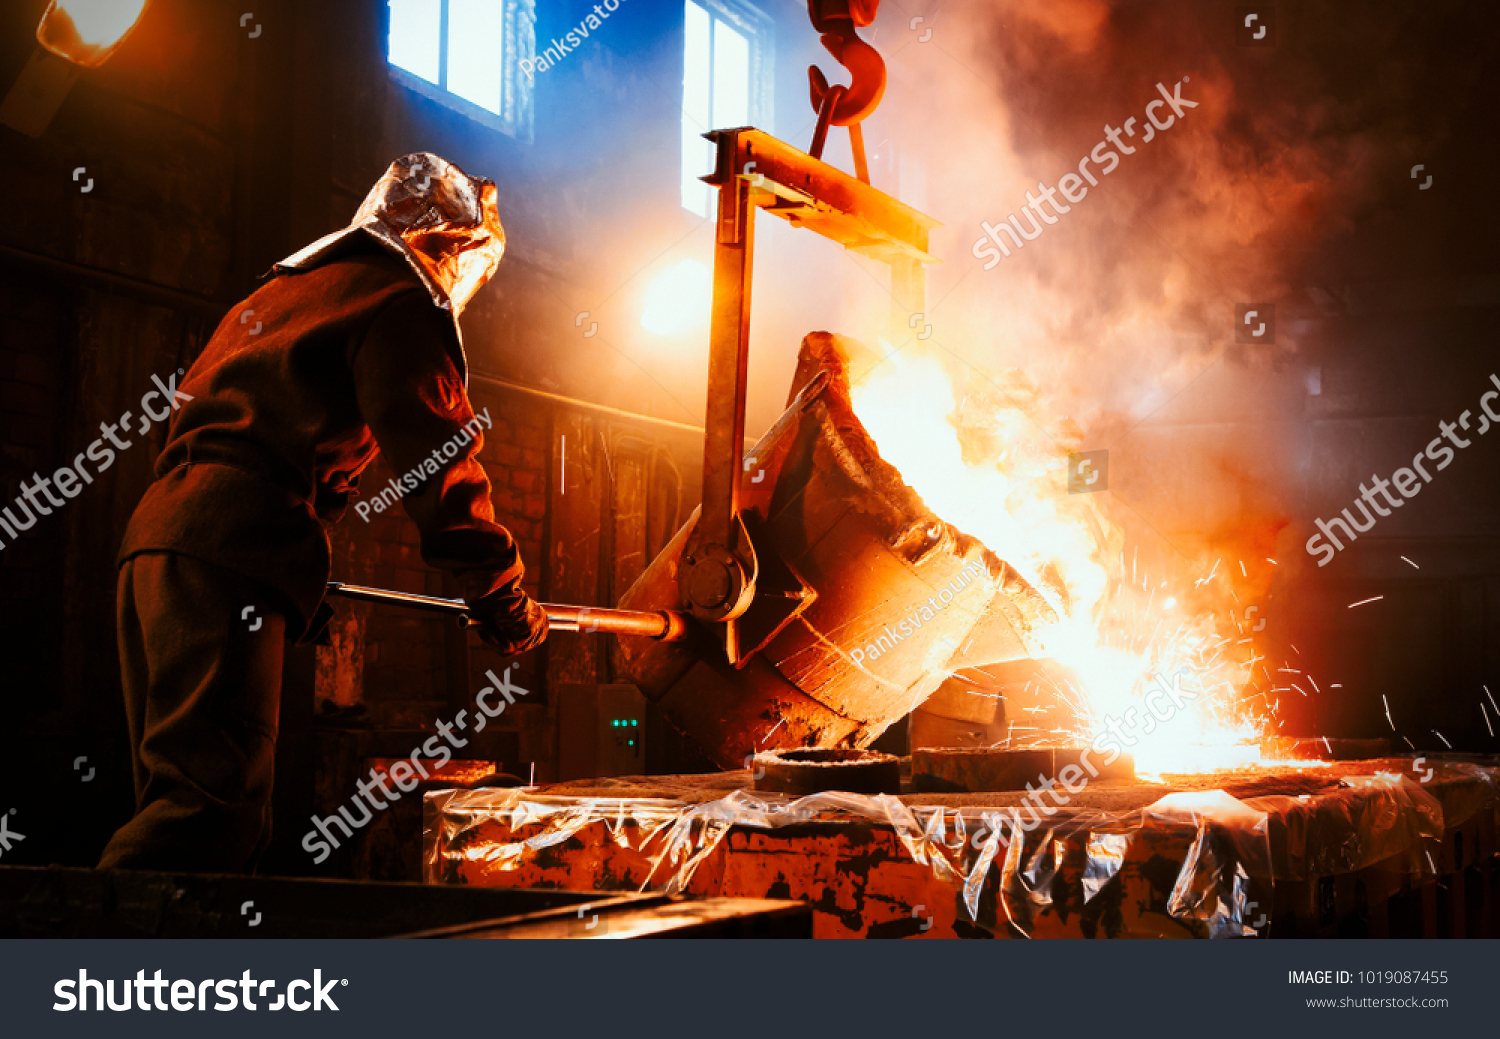 Workers operates at the metallurgical plant. The liquid metal is poured into molds. Worker controlling metal melting in furnaces. #1019087455